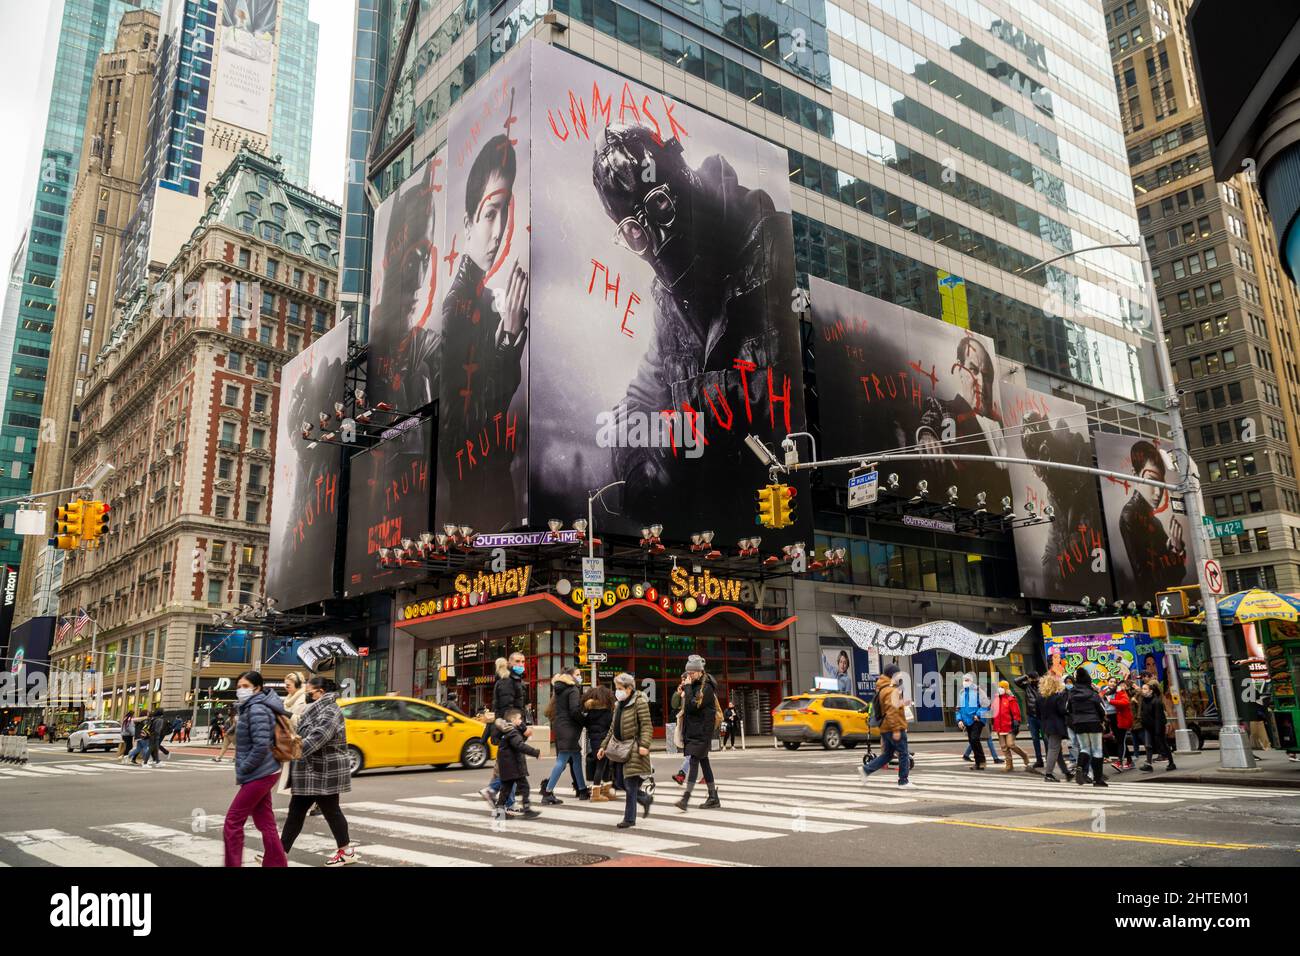 Advertising for the Warner Bros. Pictures’  “The Batman” film is seen in Times Square in New York on Wednesday, February 16, 2022. The film, starring Robert Pattinson, is scheduled to be released in the U.S. on March 4, 2022. (© Richard B. Levine) Stock Photo